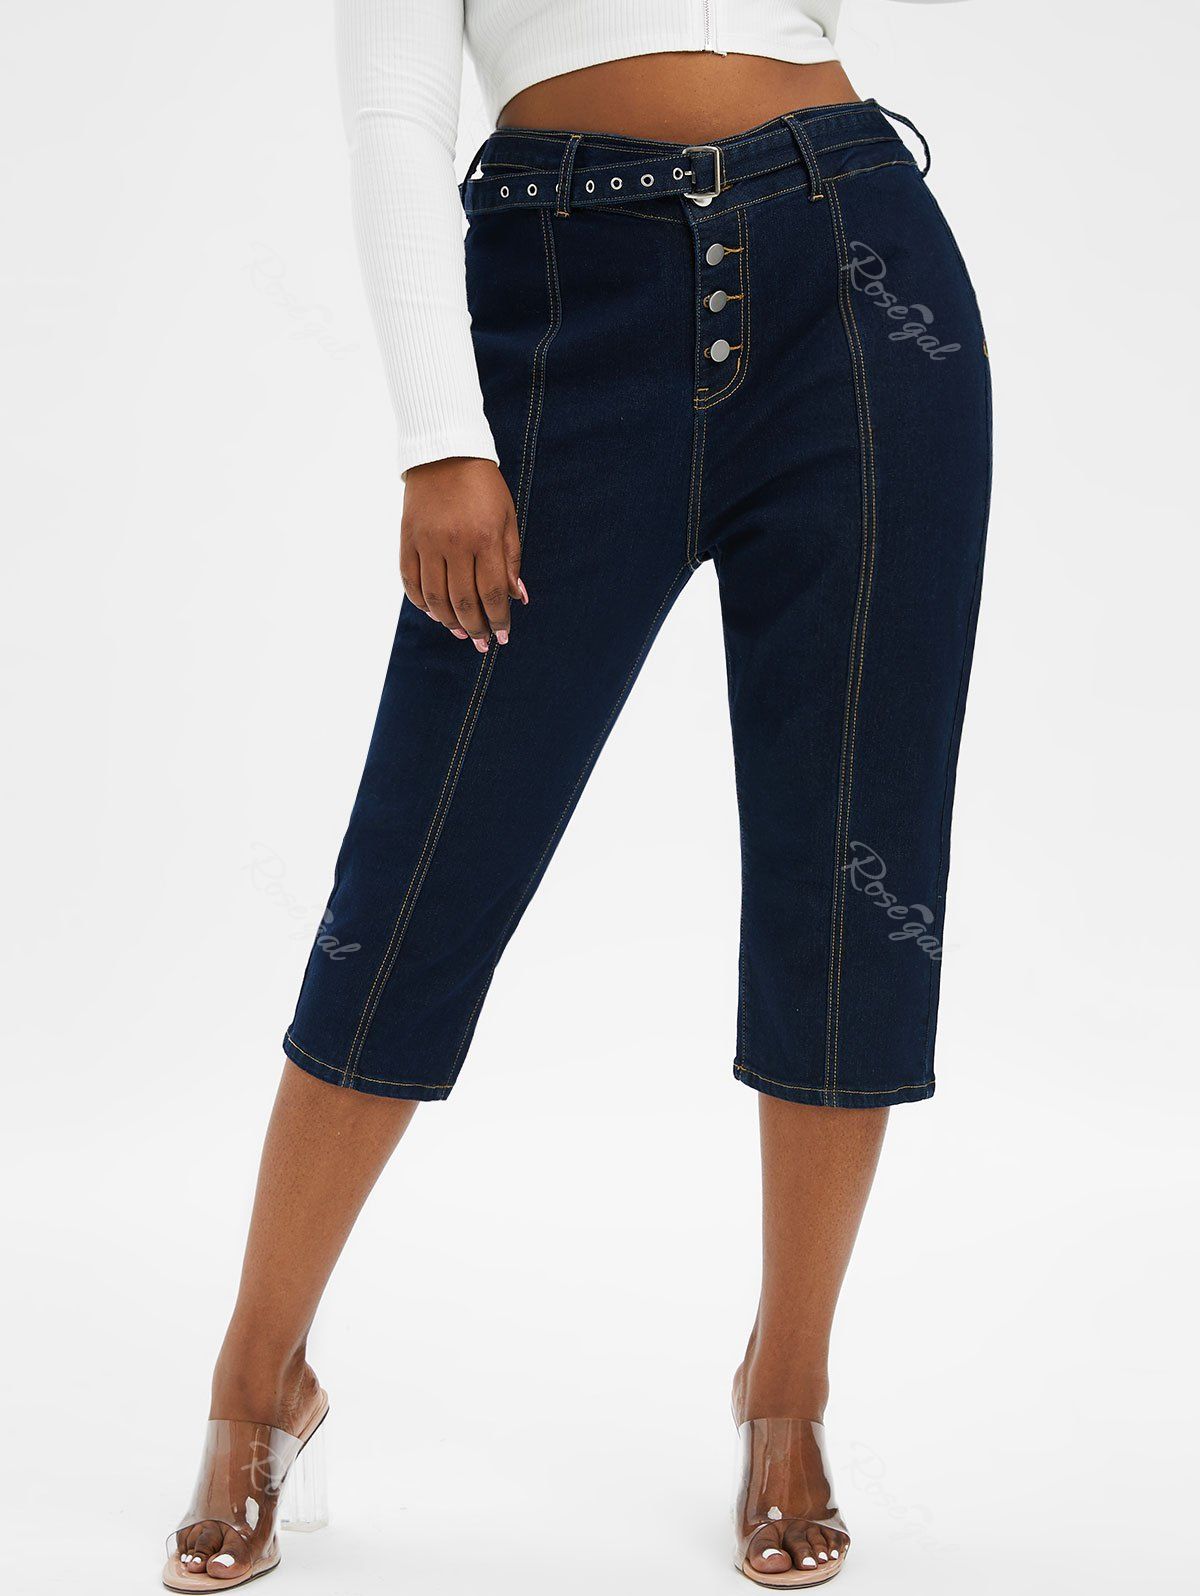 New Plus Size & Curve Belted Button Fly Contrast Stitching Jeans  